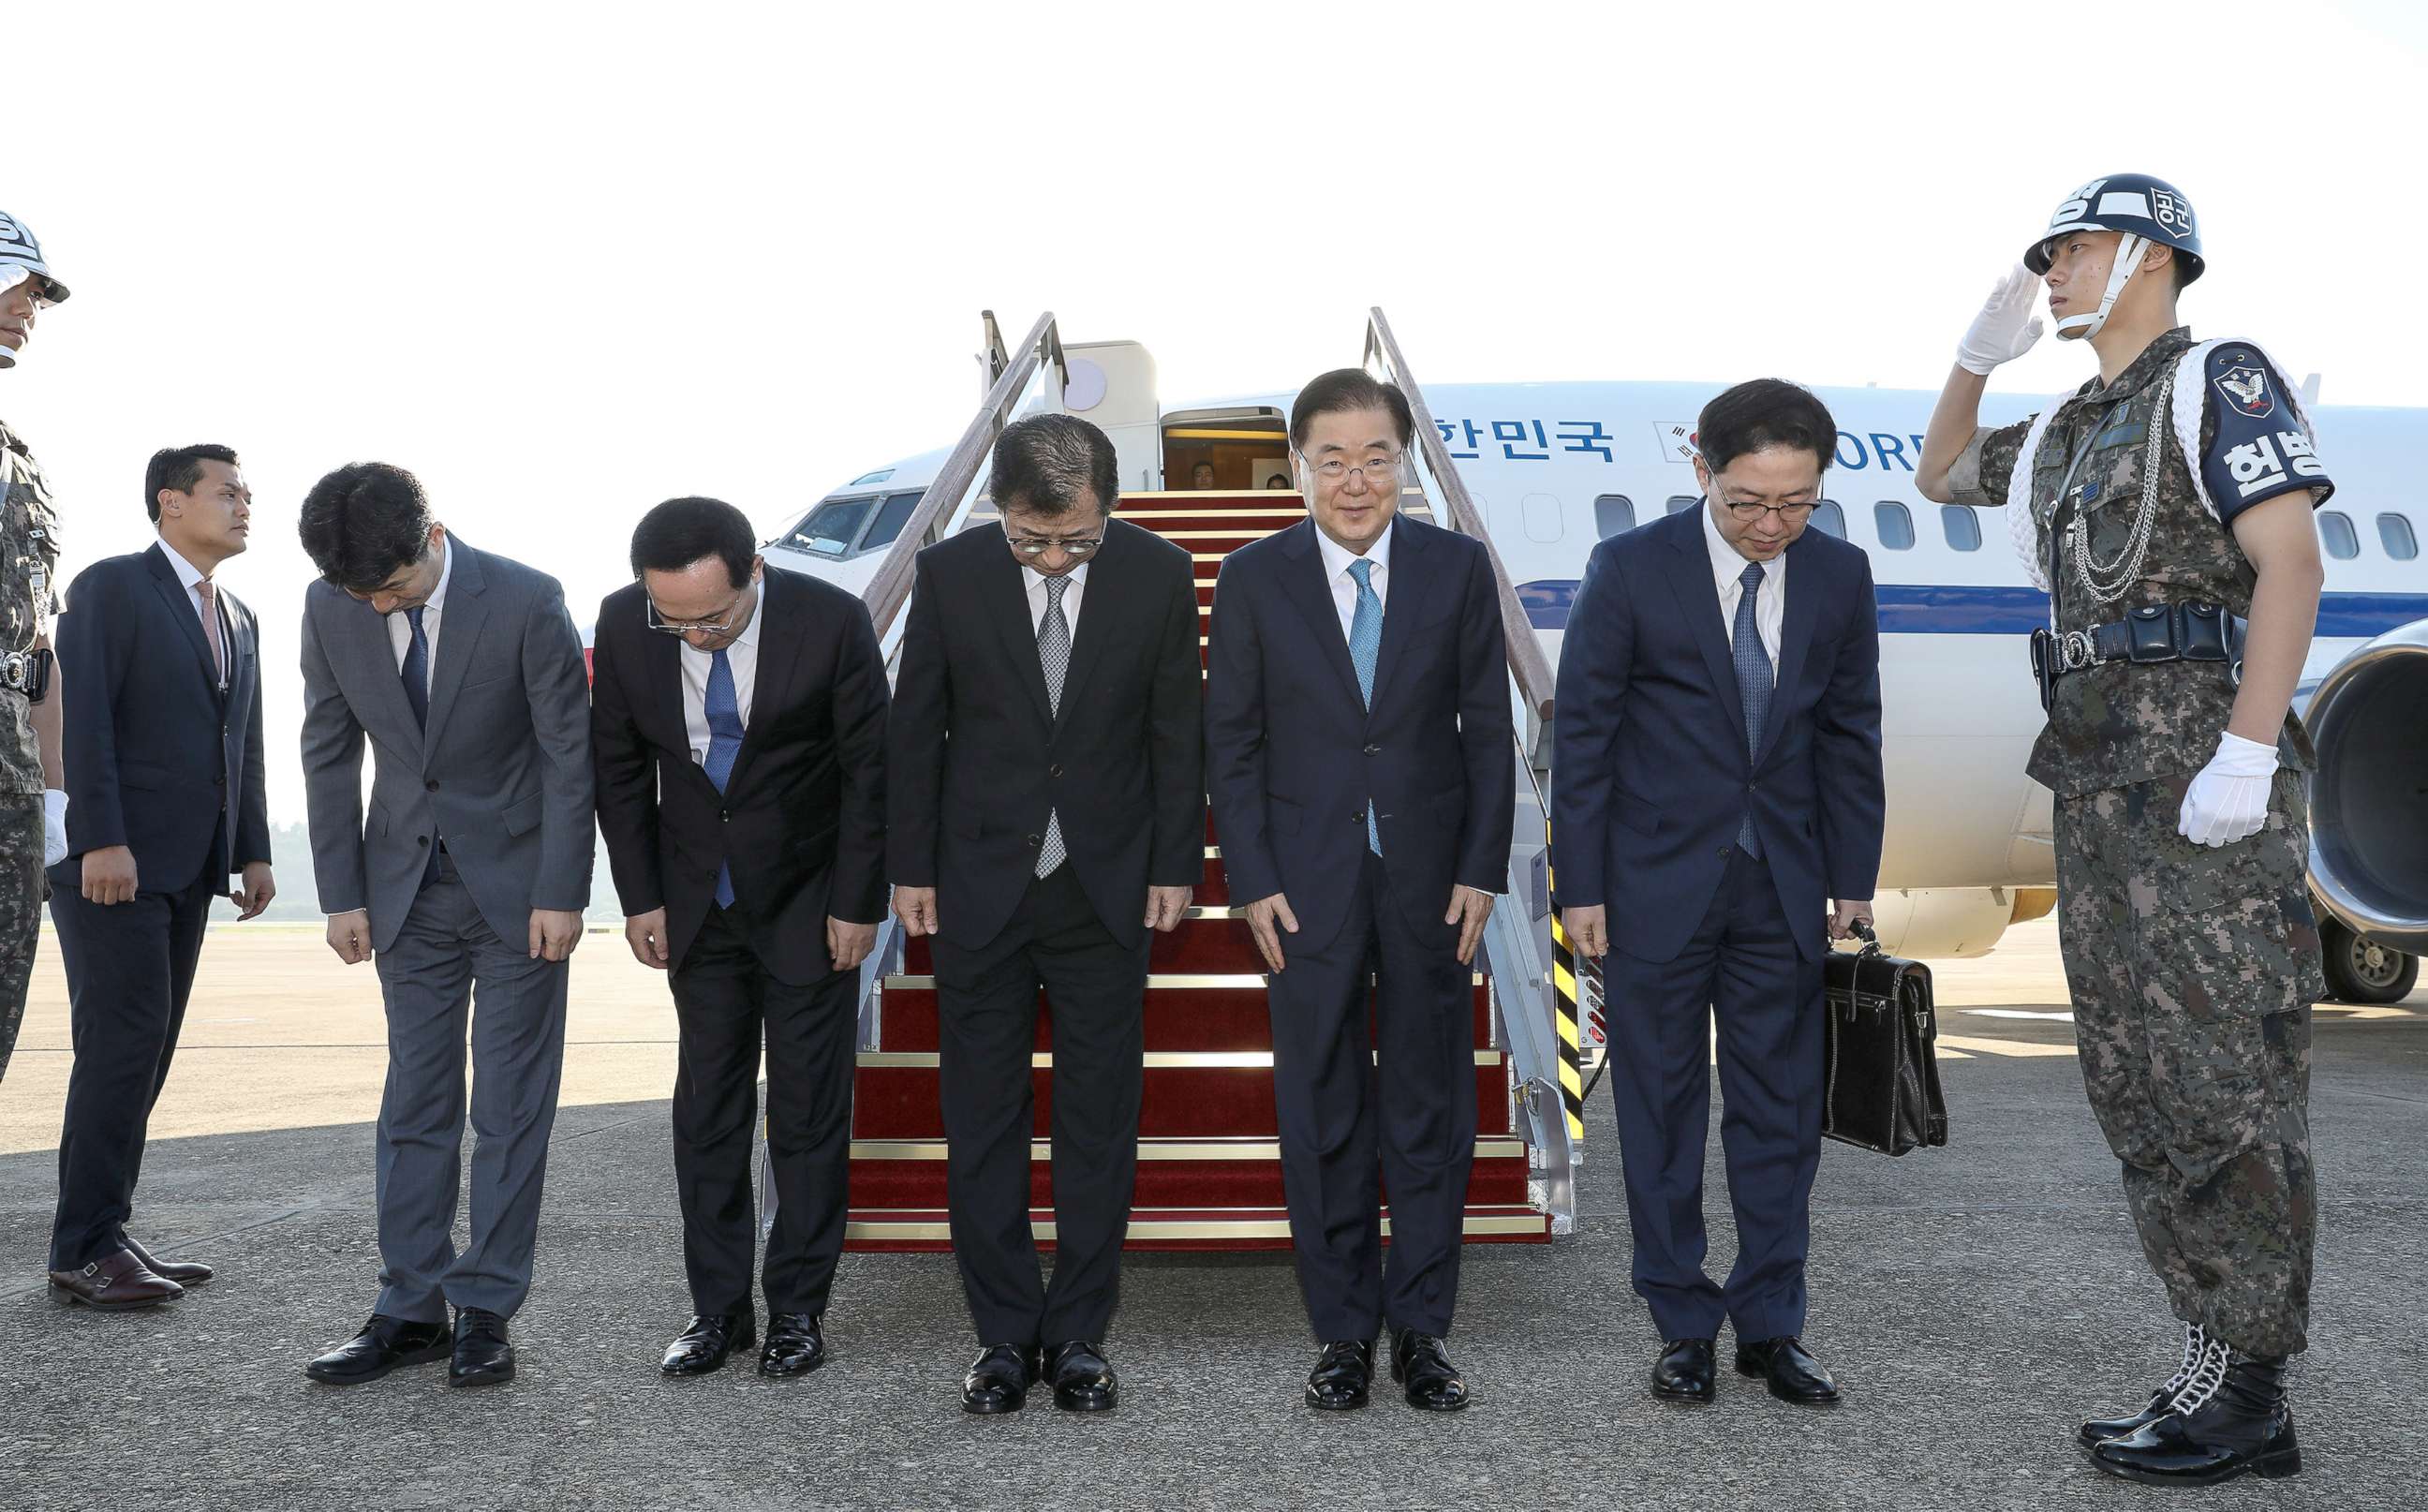 PHOTO: South Korean special envoys led by the chief of the national security office at Seoul's presidential Blue House, Chung Eui-yong, leave for Pyongyang from an airport in Sungnam city, South Korea, Sept. 5, 2018.